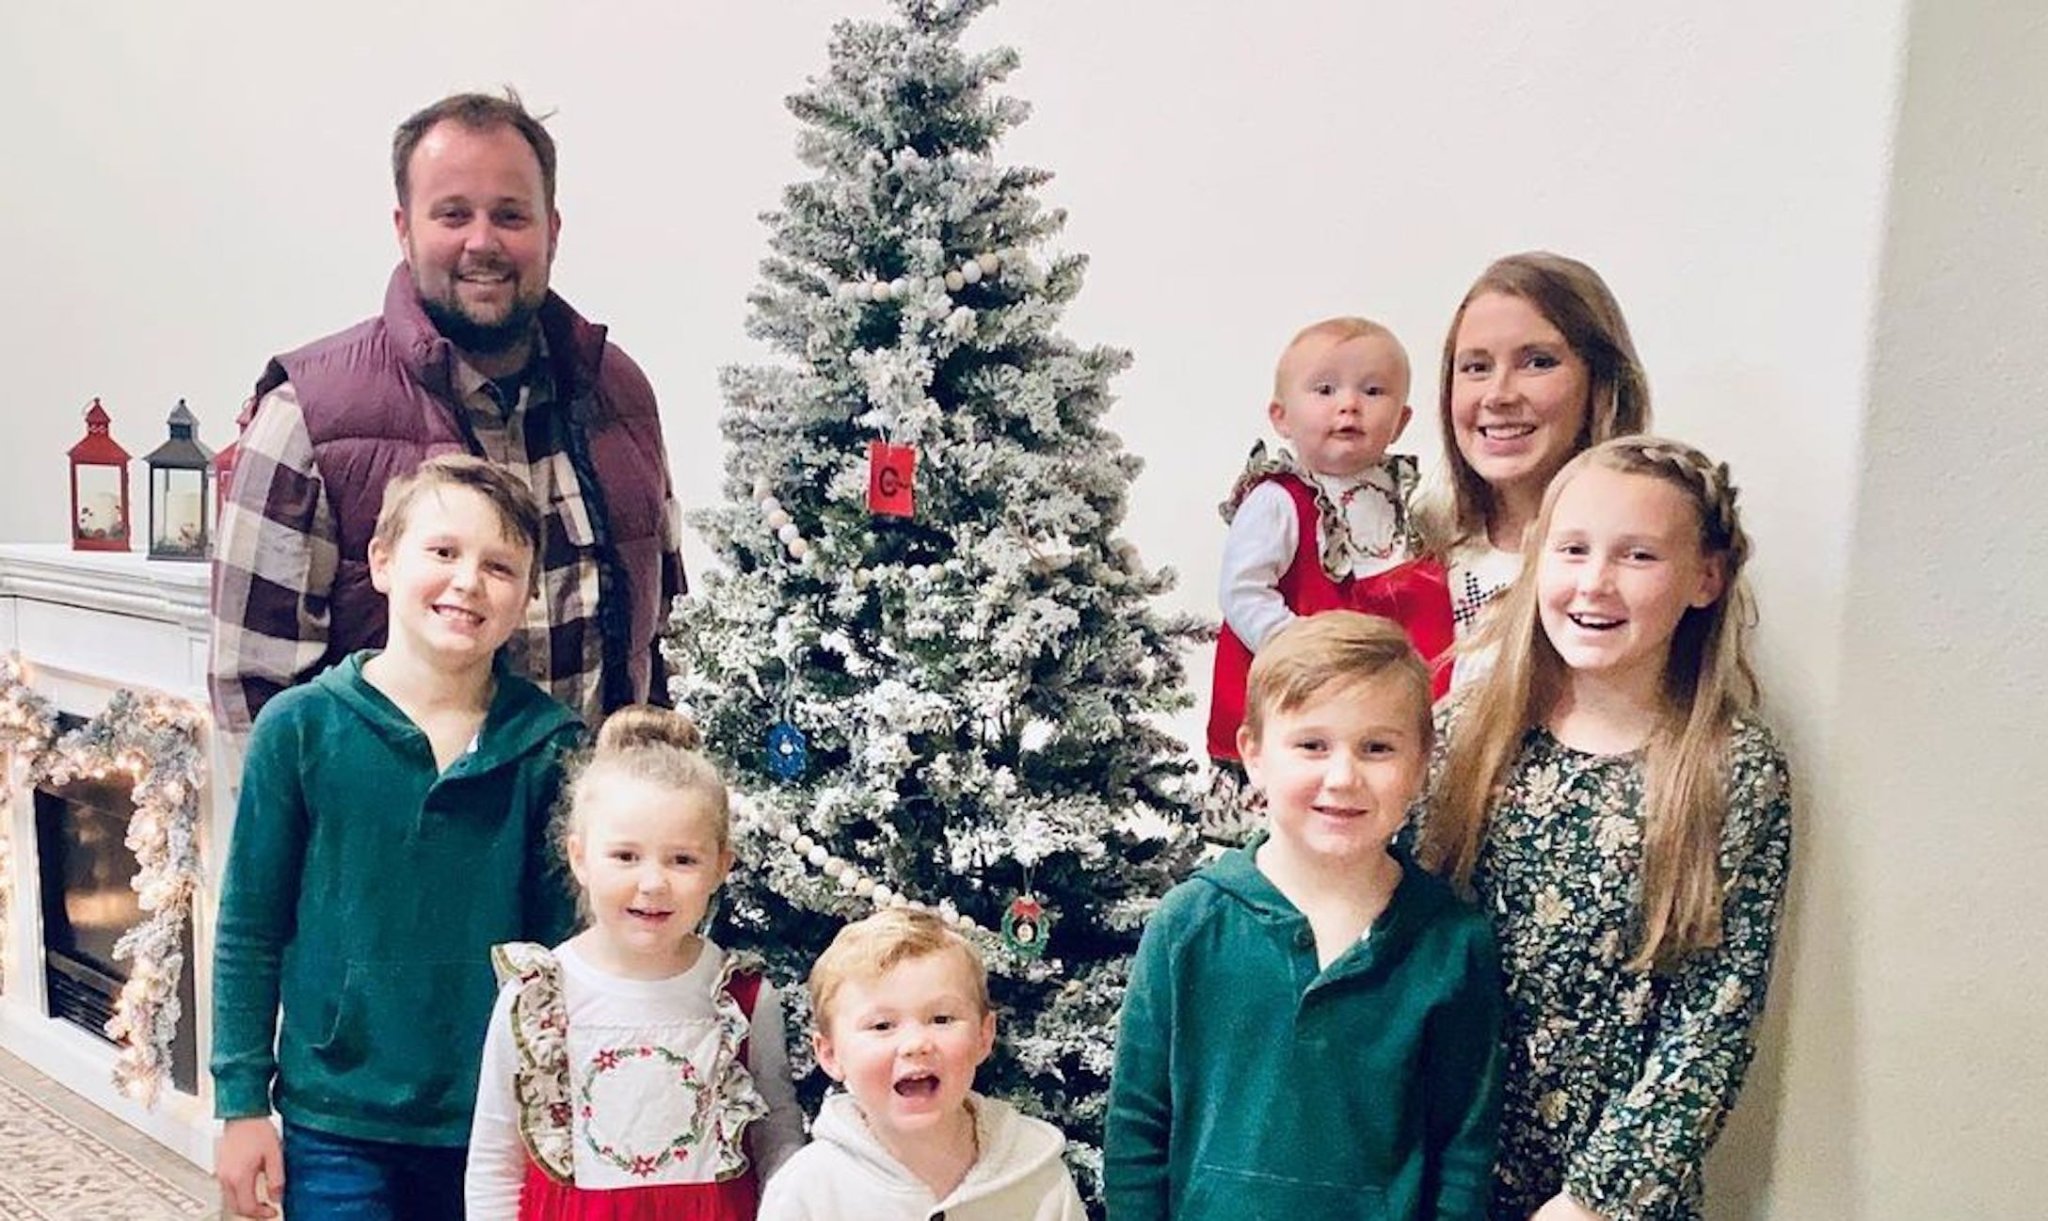 A Resurfaced '19 Kids & Counting' Clip Appears to Show Josh Duggar Sexually Harassing Anna